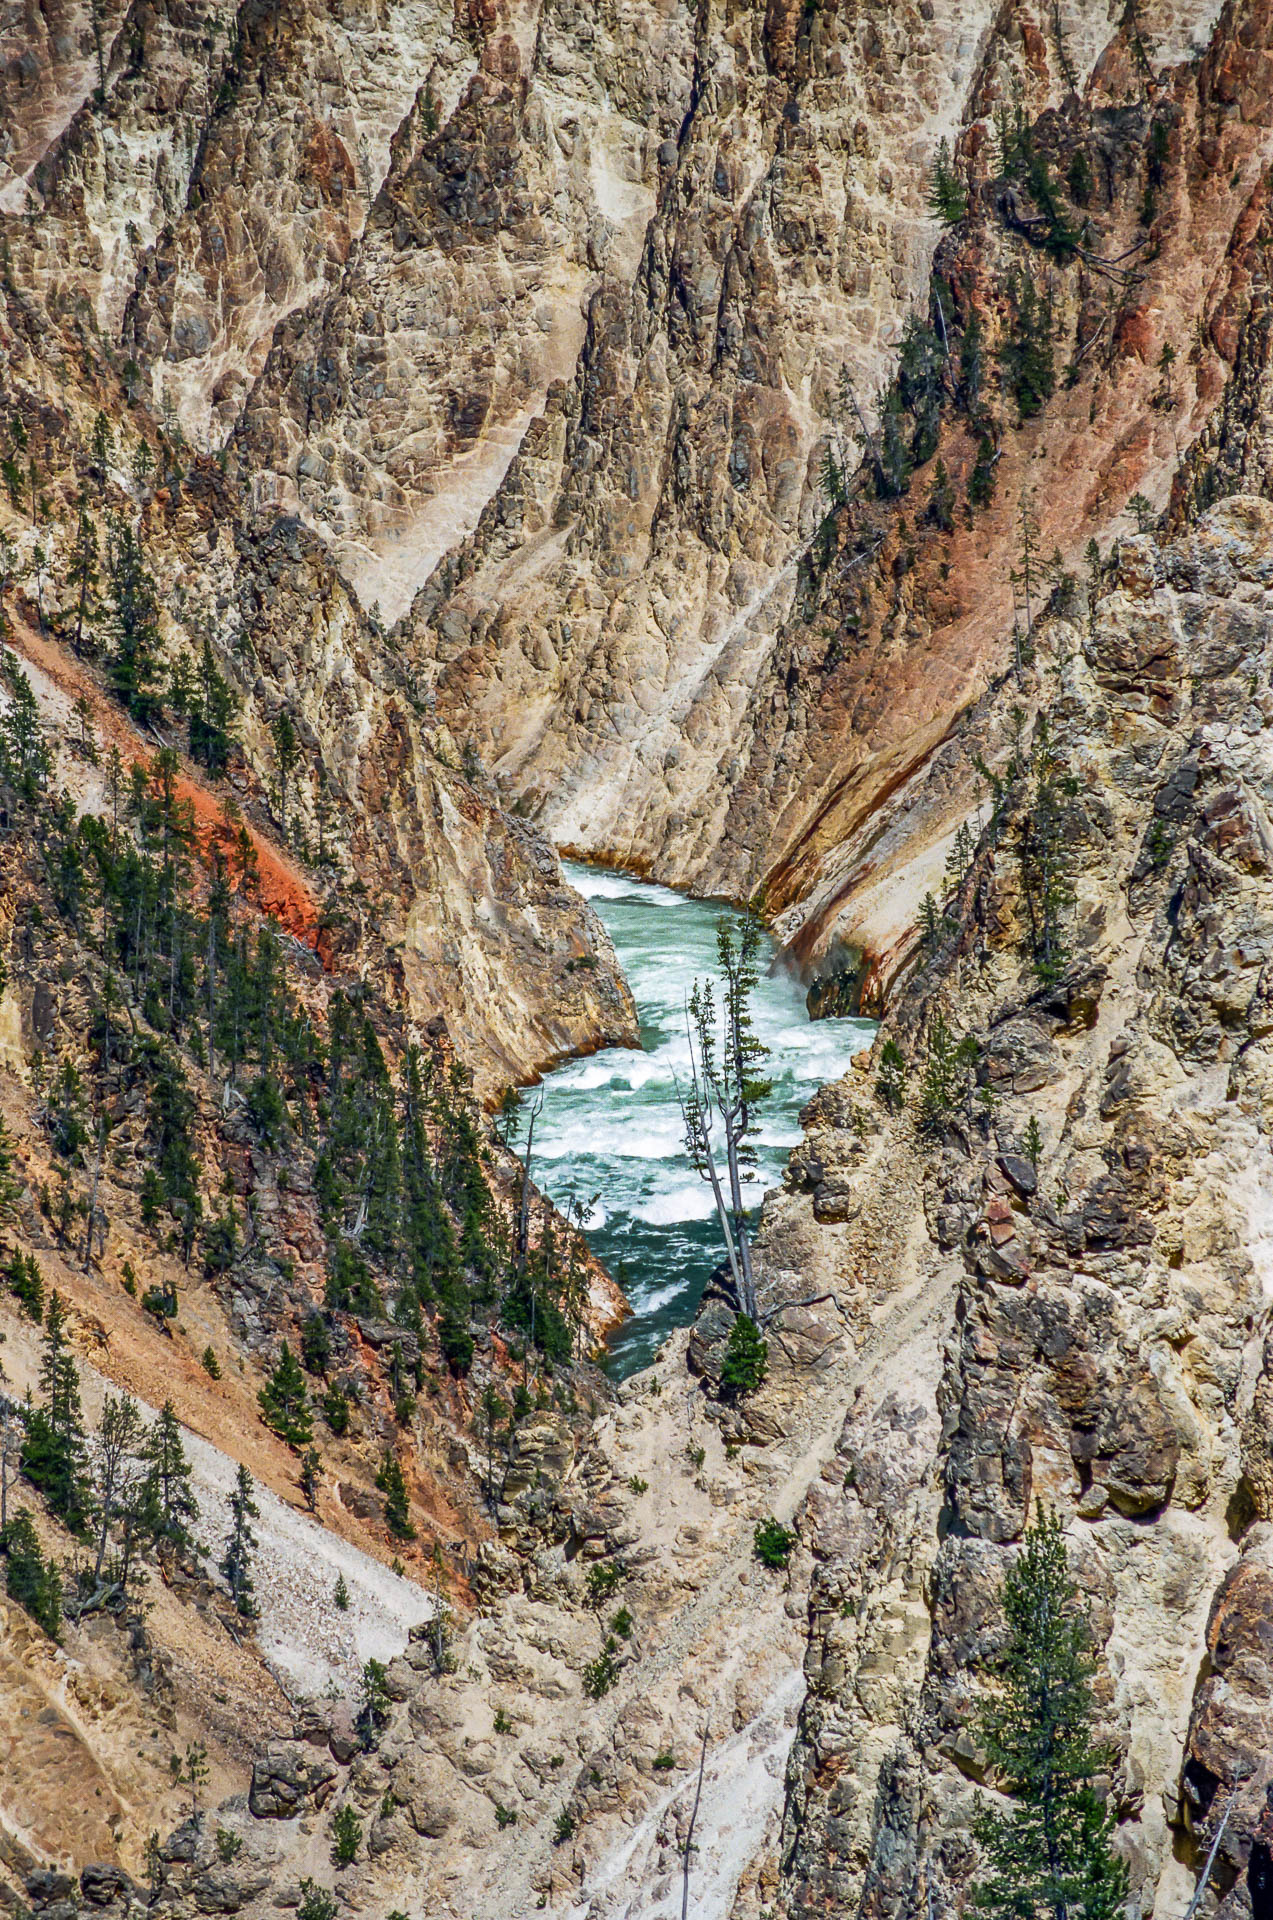 The bottom of the Grand Canyon of the Yellowstone